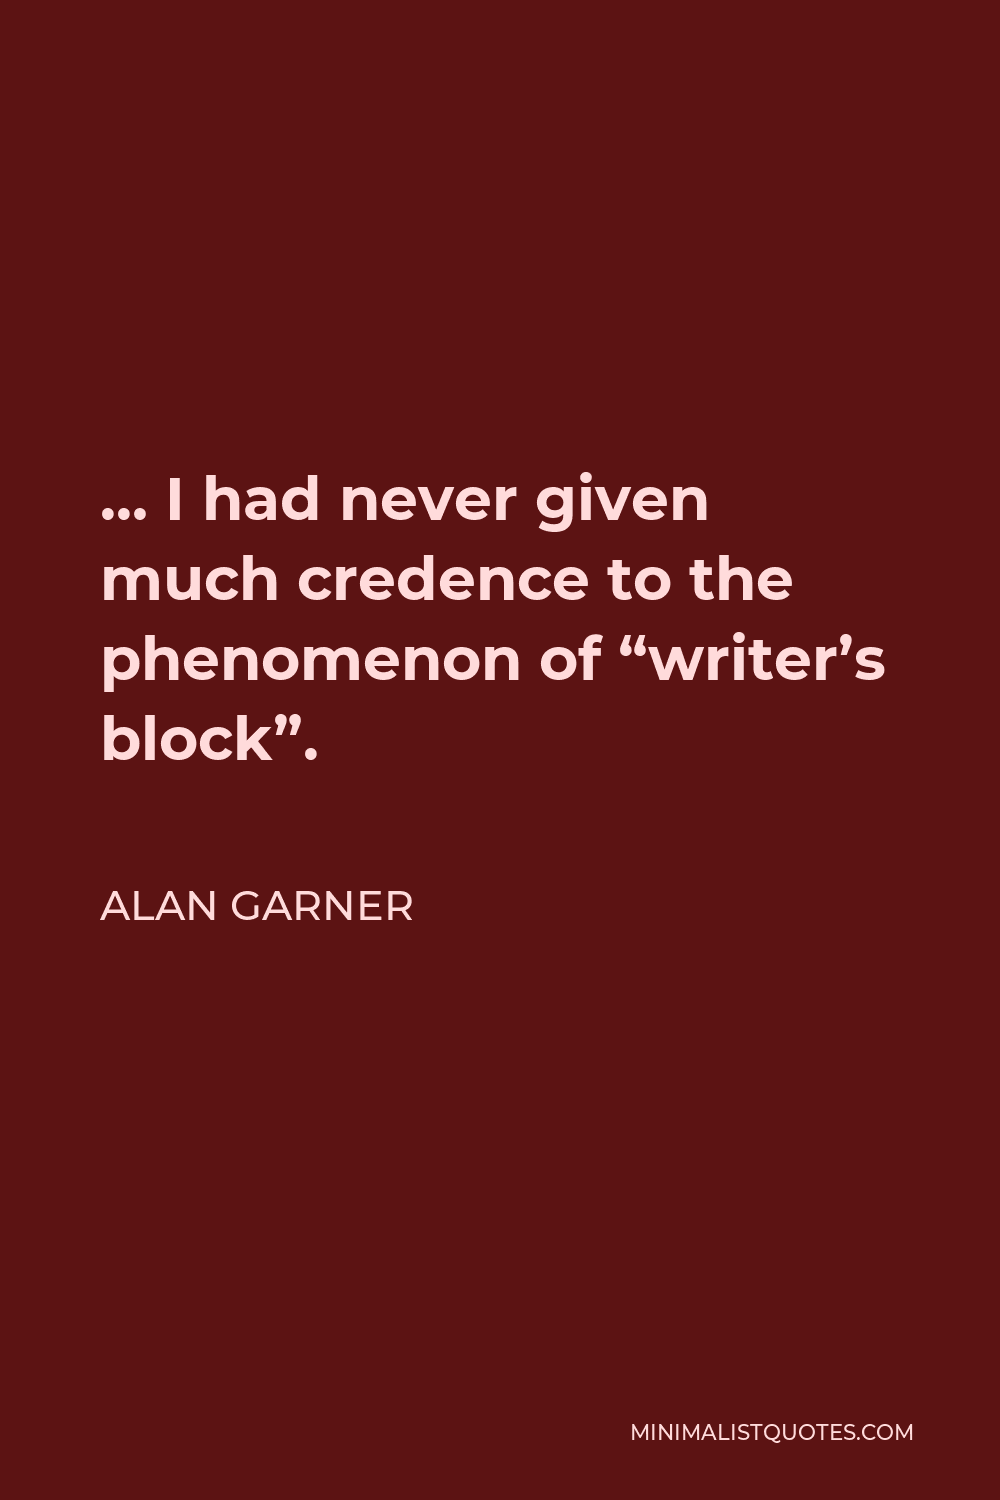 Alan Garner Quote - … I had never given much credence to the phenomenon of “writer’s block”.